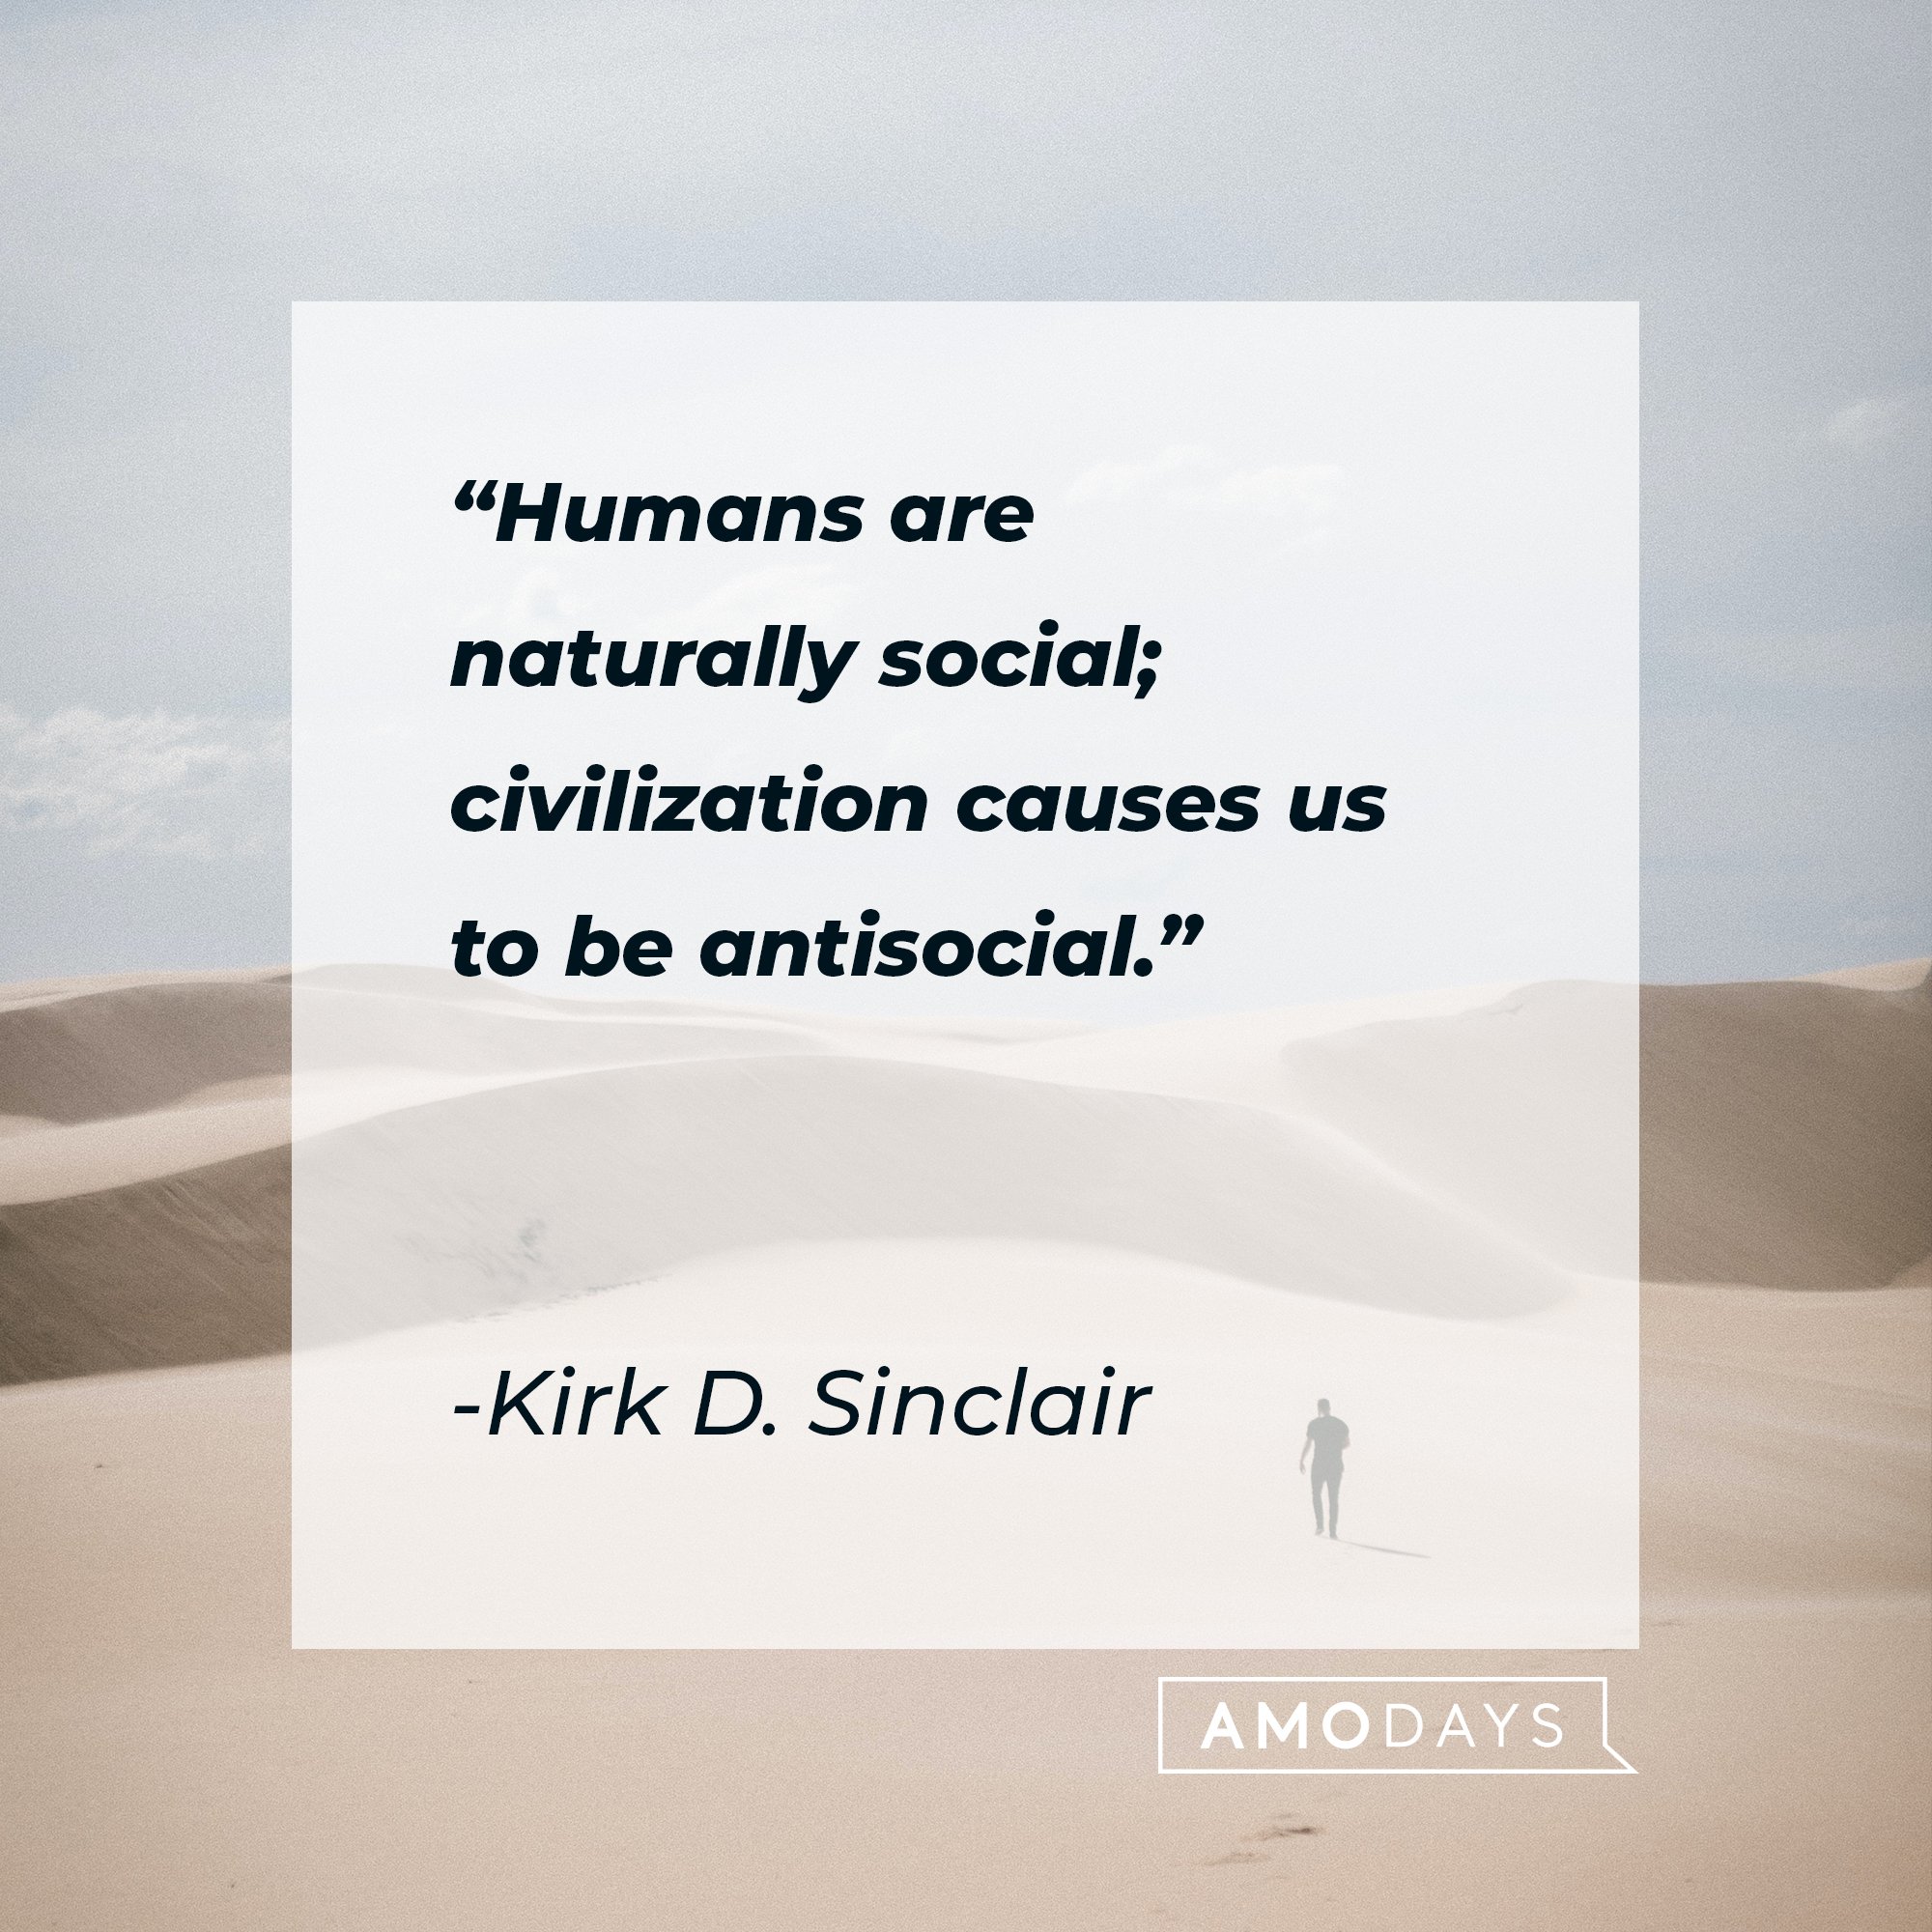 Kirk D. Sinclair’s quote: “Humans are naturally social; civilization causes us to be antisocial." | Image: AmoDays 